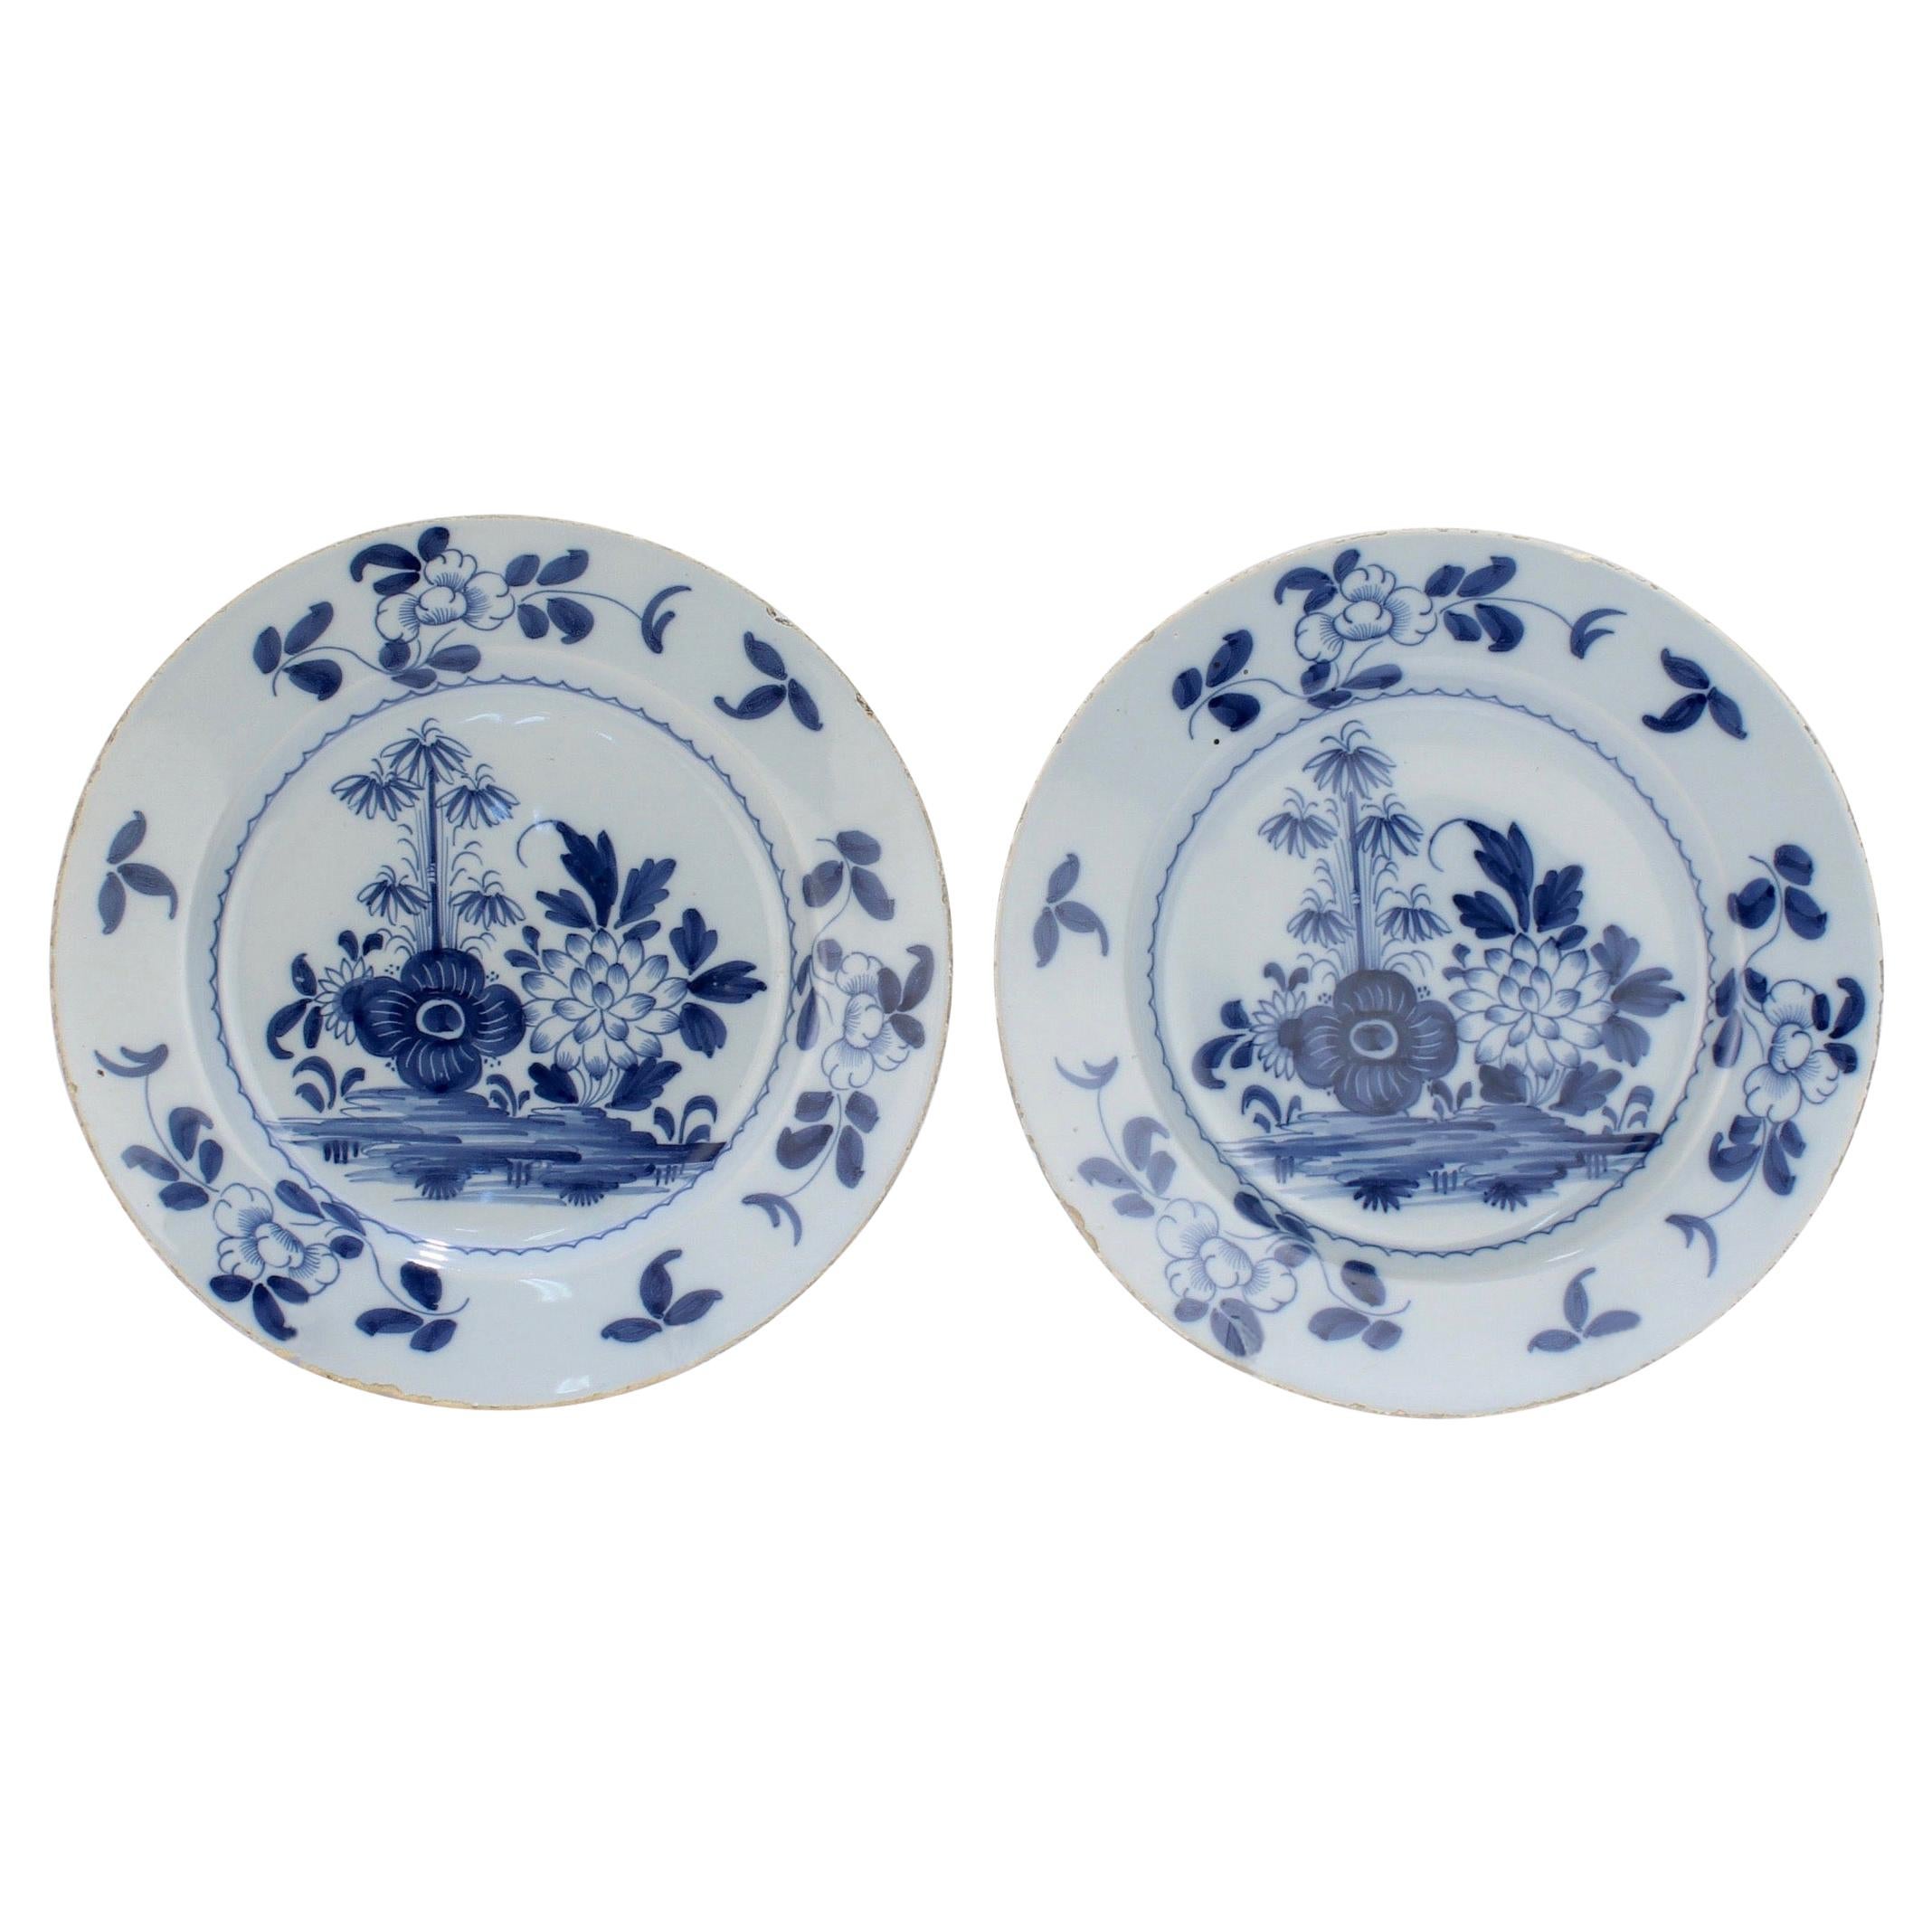 Pair of 18th Century Bristol English Delft Pottery Plates with Peony Decoration